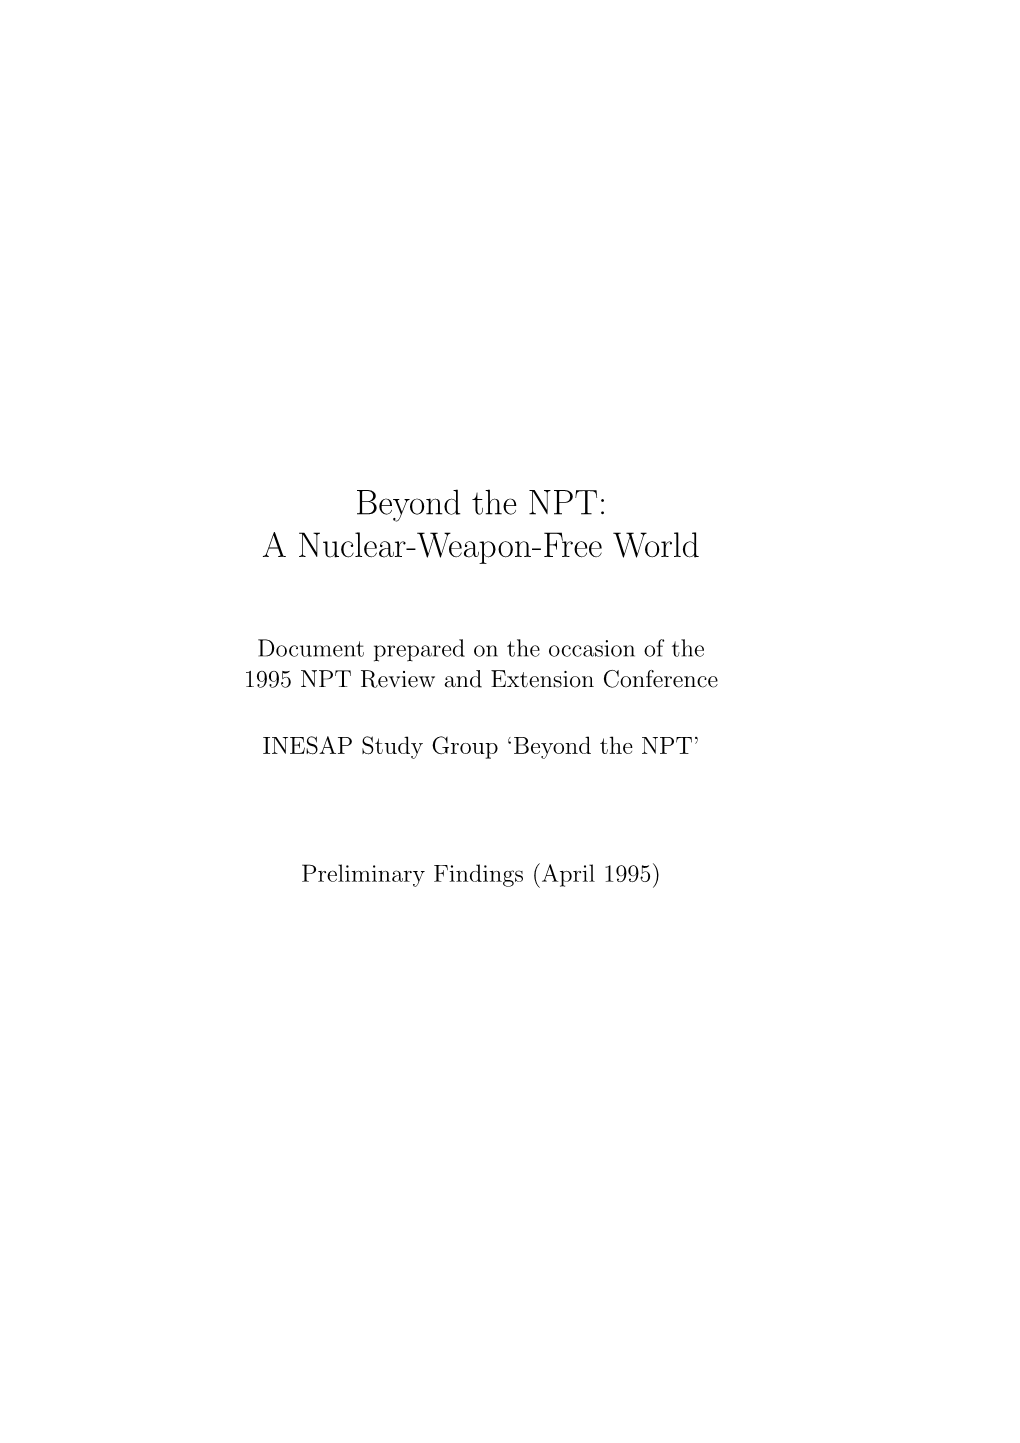 Beyond the NPT: a Nuclear-Weapon-Free World